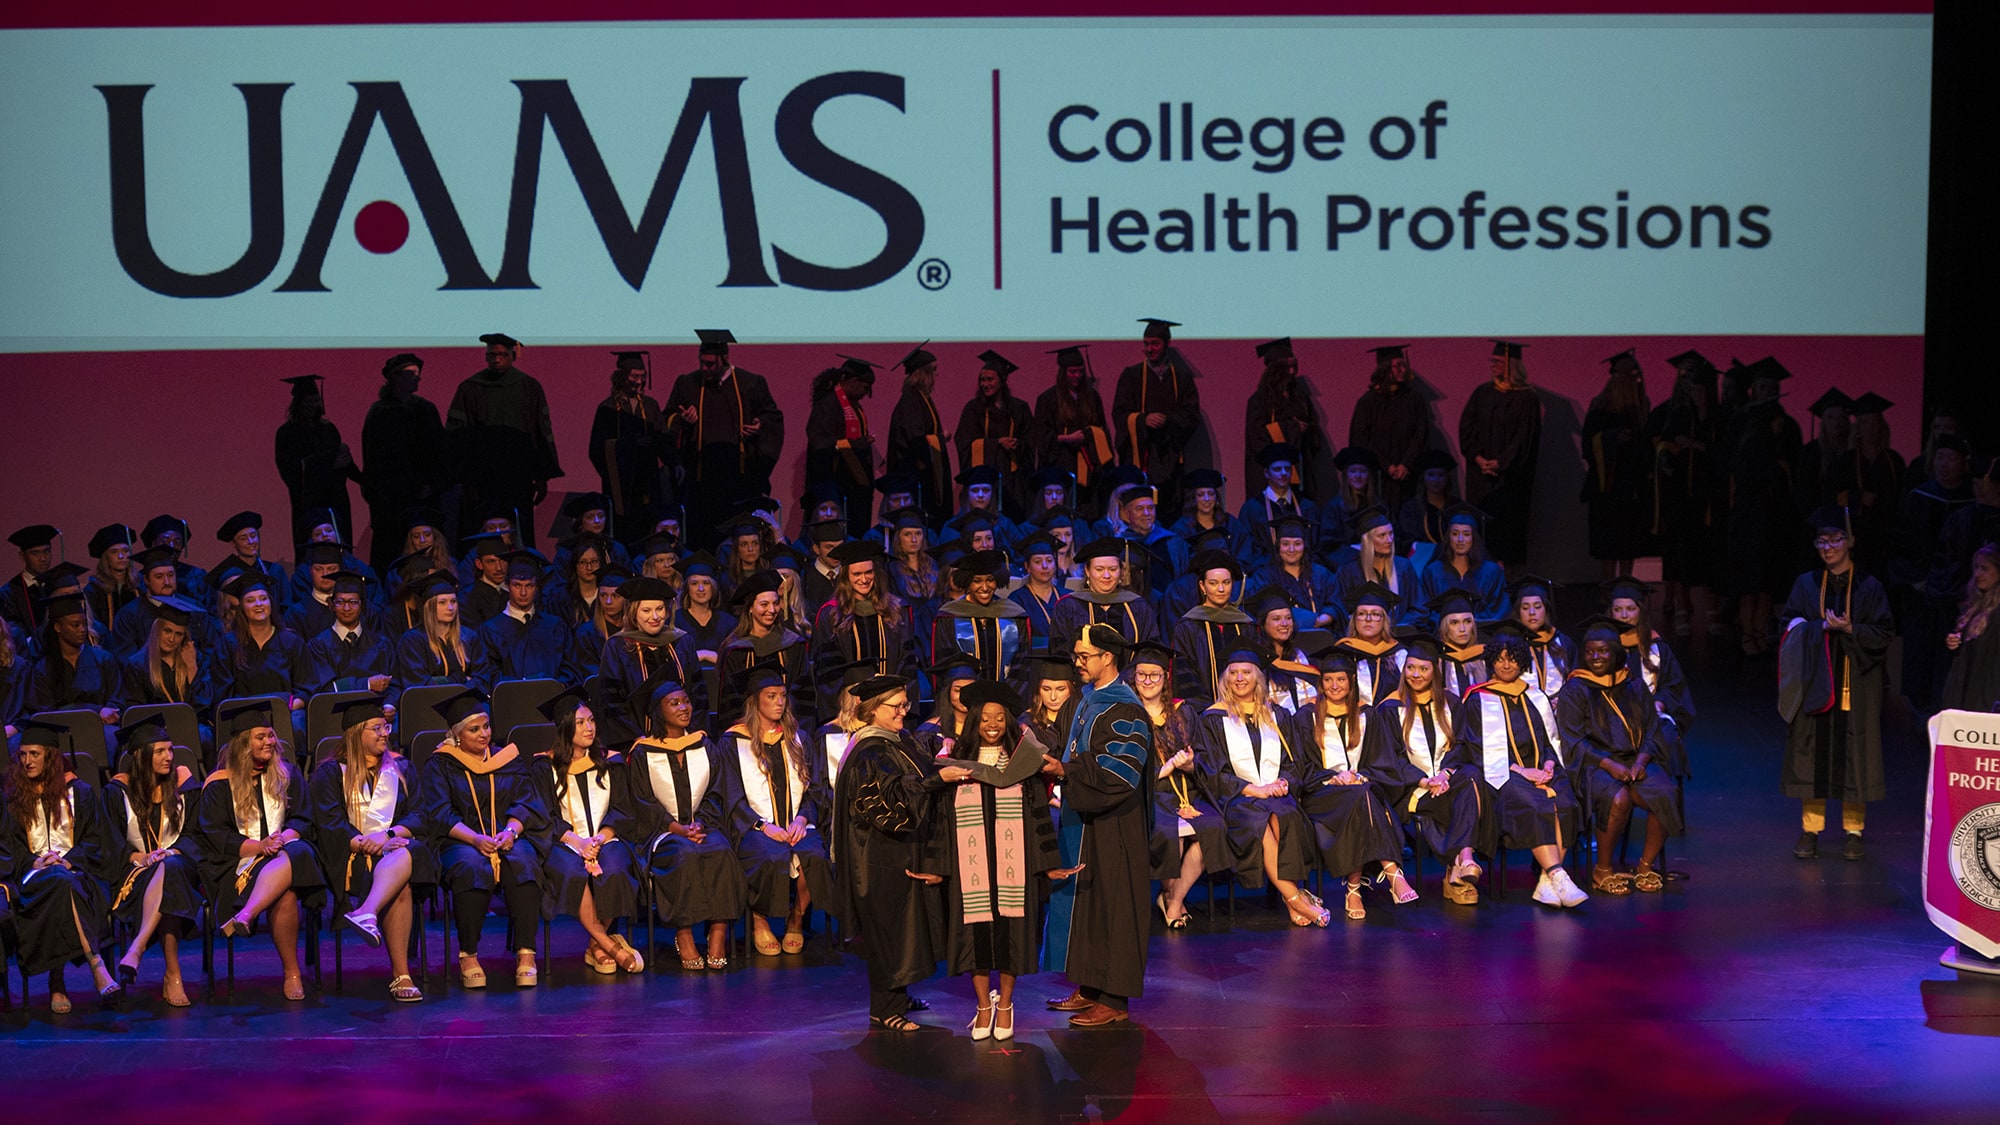 A student stands center stage May 26 in the CHARTS Theater as two members of the College of Health Professions faculty place her academic hood on her shoulders.